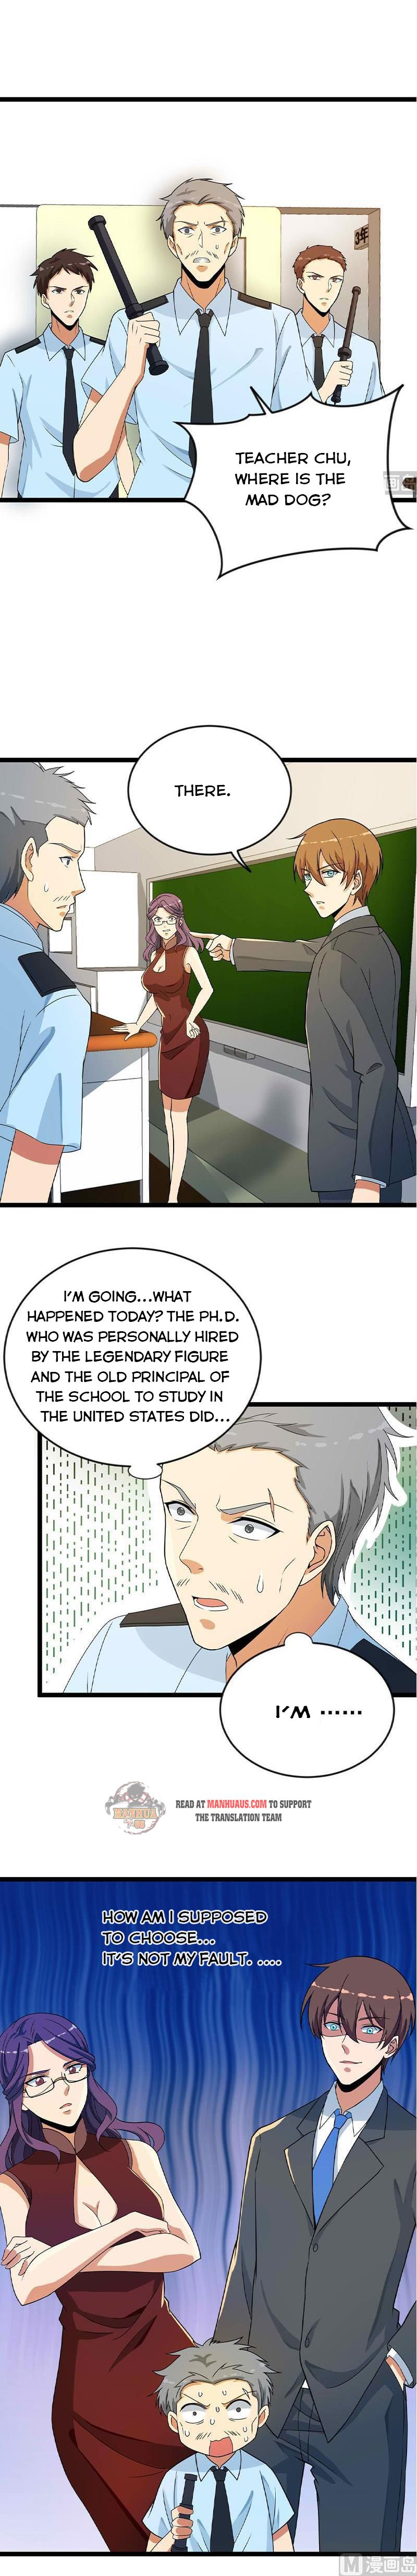 Cultivation Return on Campus Chapter 160 page 3